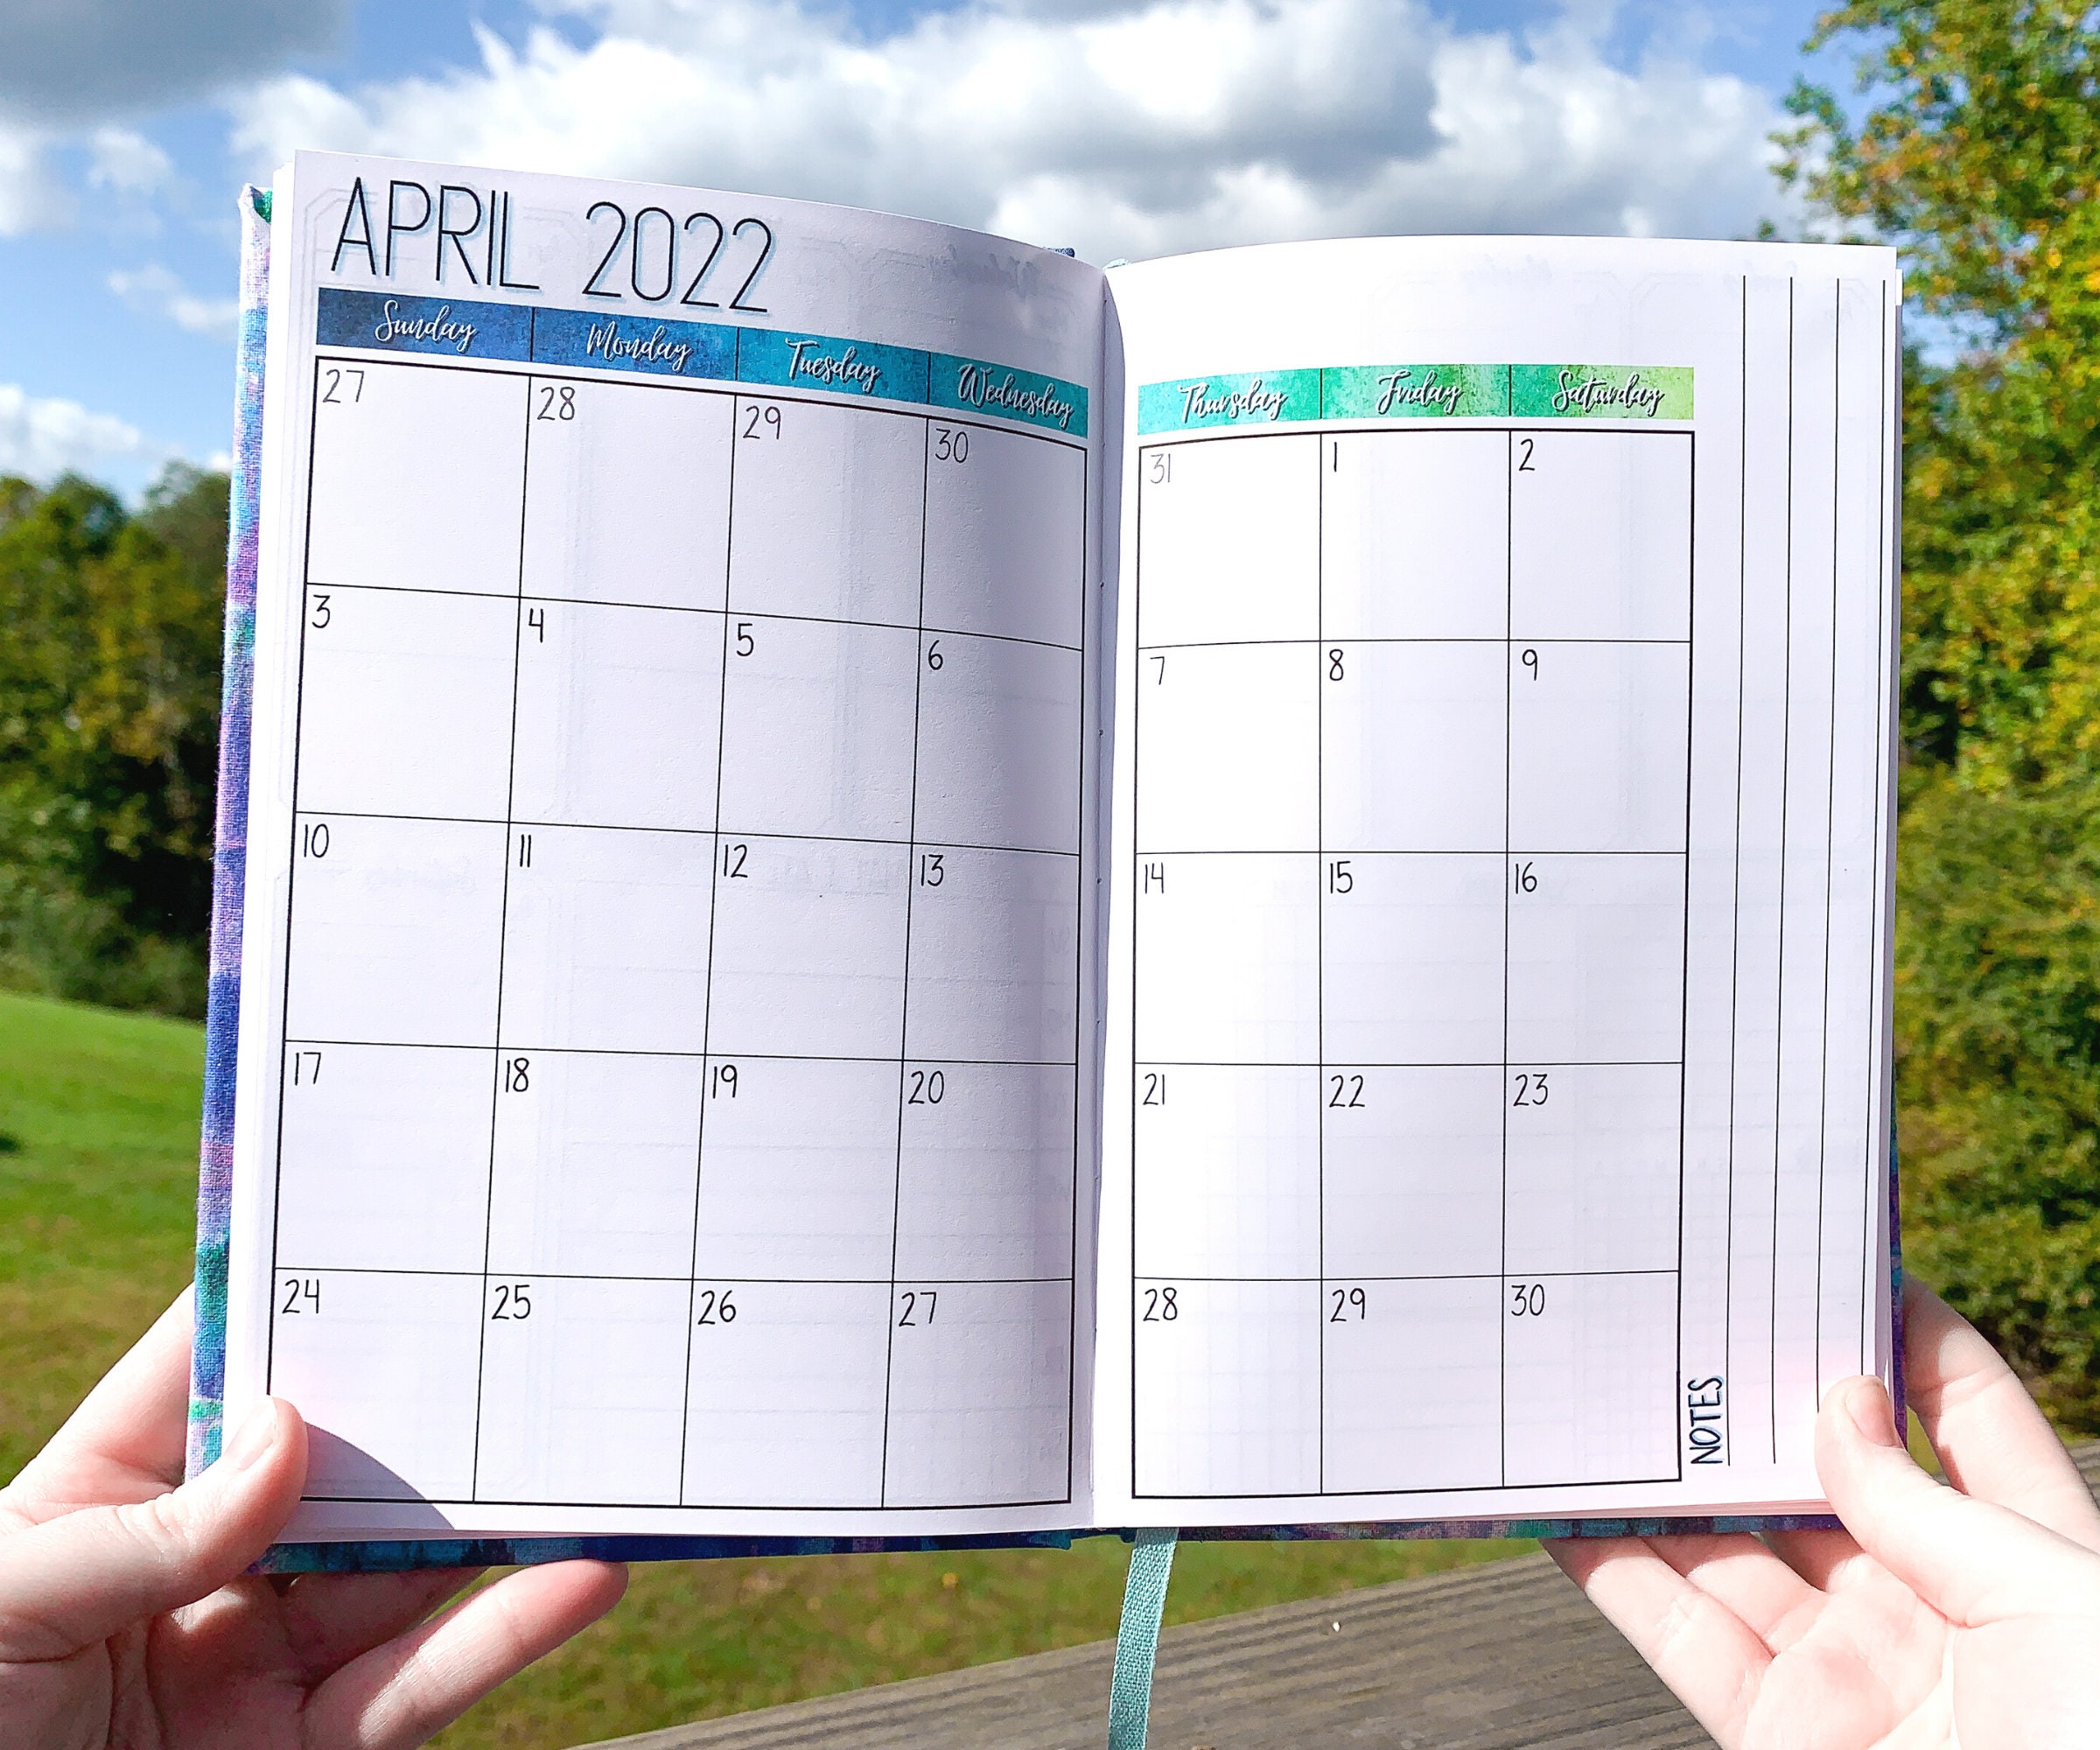 The monthly page is shown. This a calendar page with the month name and year at the top right and a notes writing area on the right side of the calendar box. There is a blue gradient from dark blue to aqua to green where the days of the week are- this is for the blue color journal